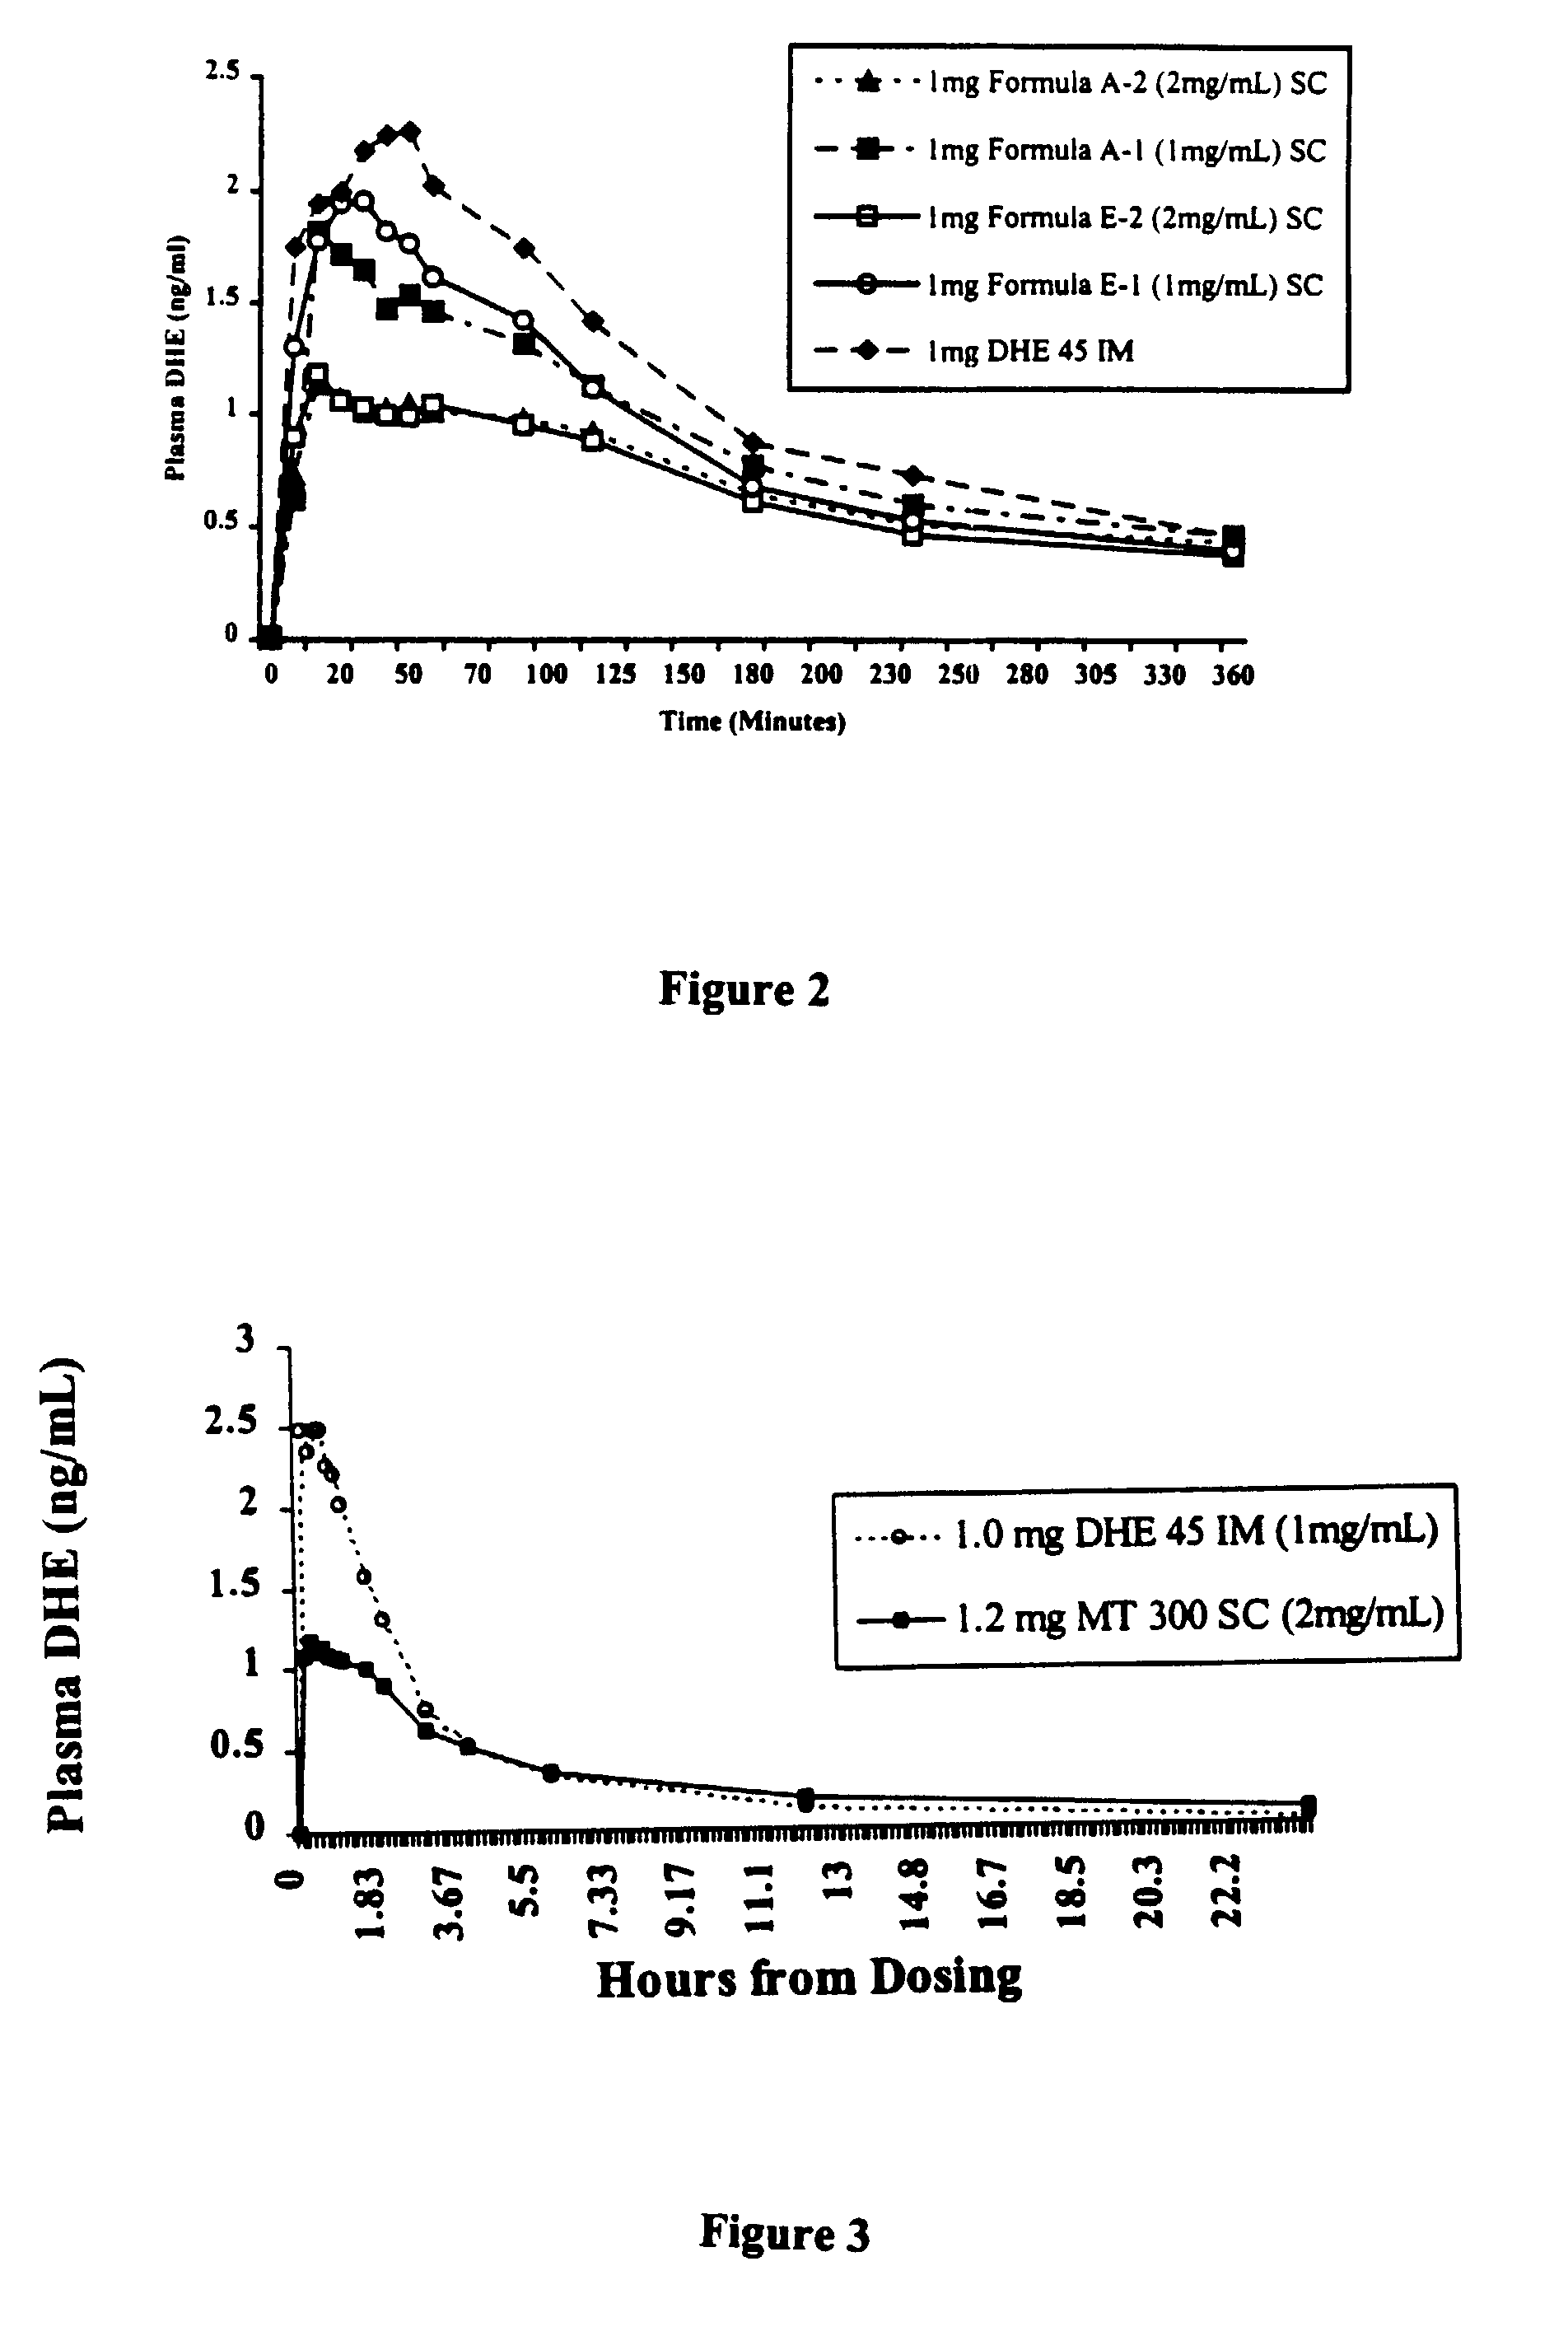 High potency dihydroergotamine compositions